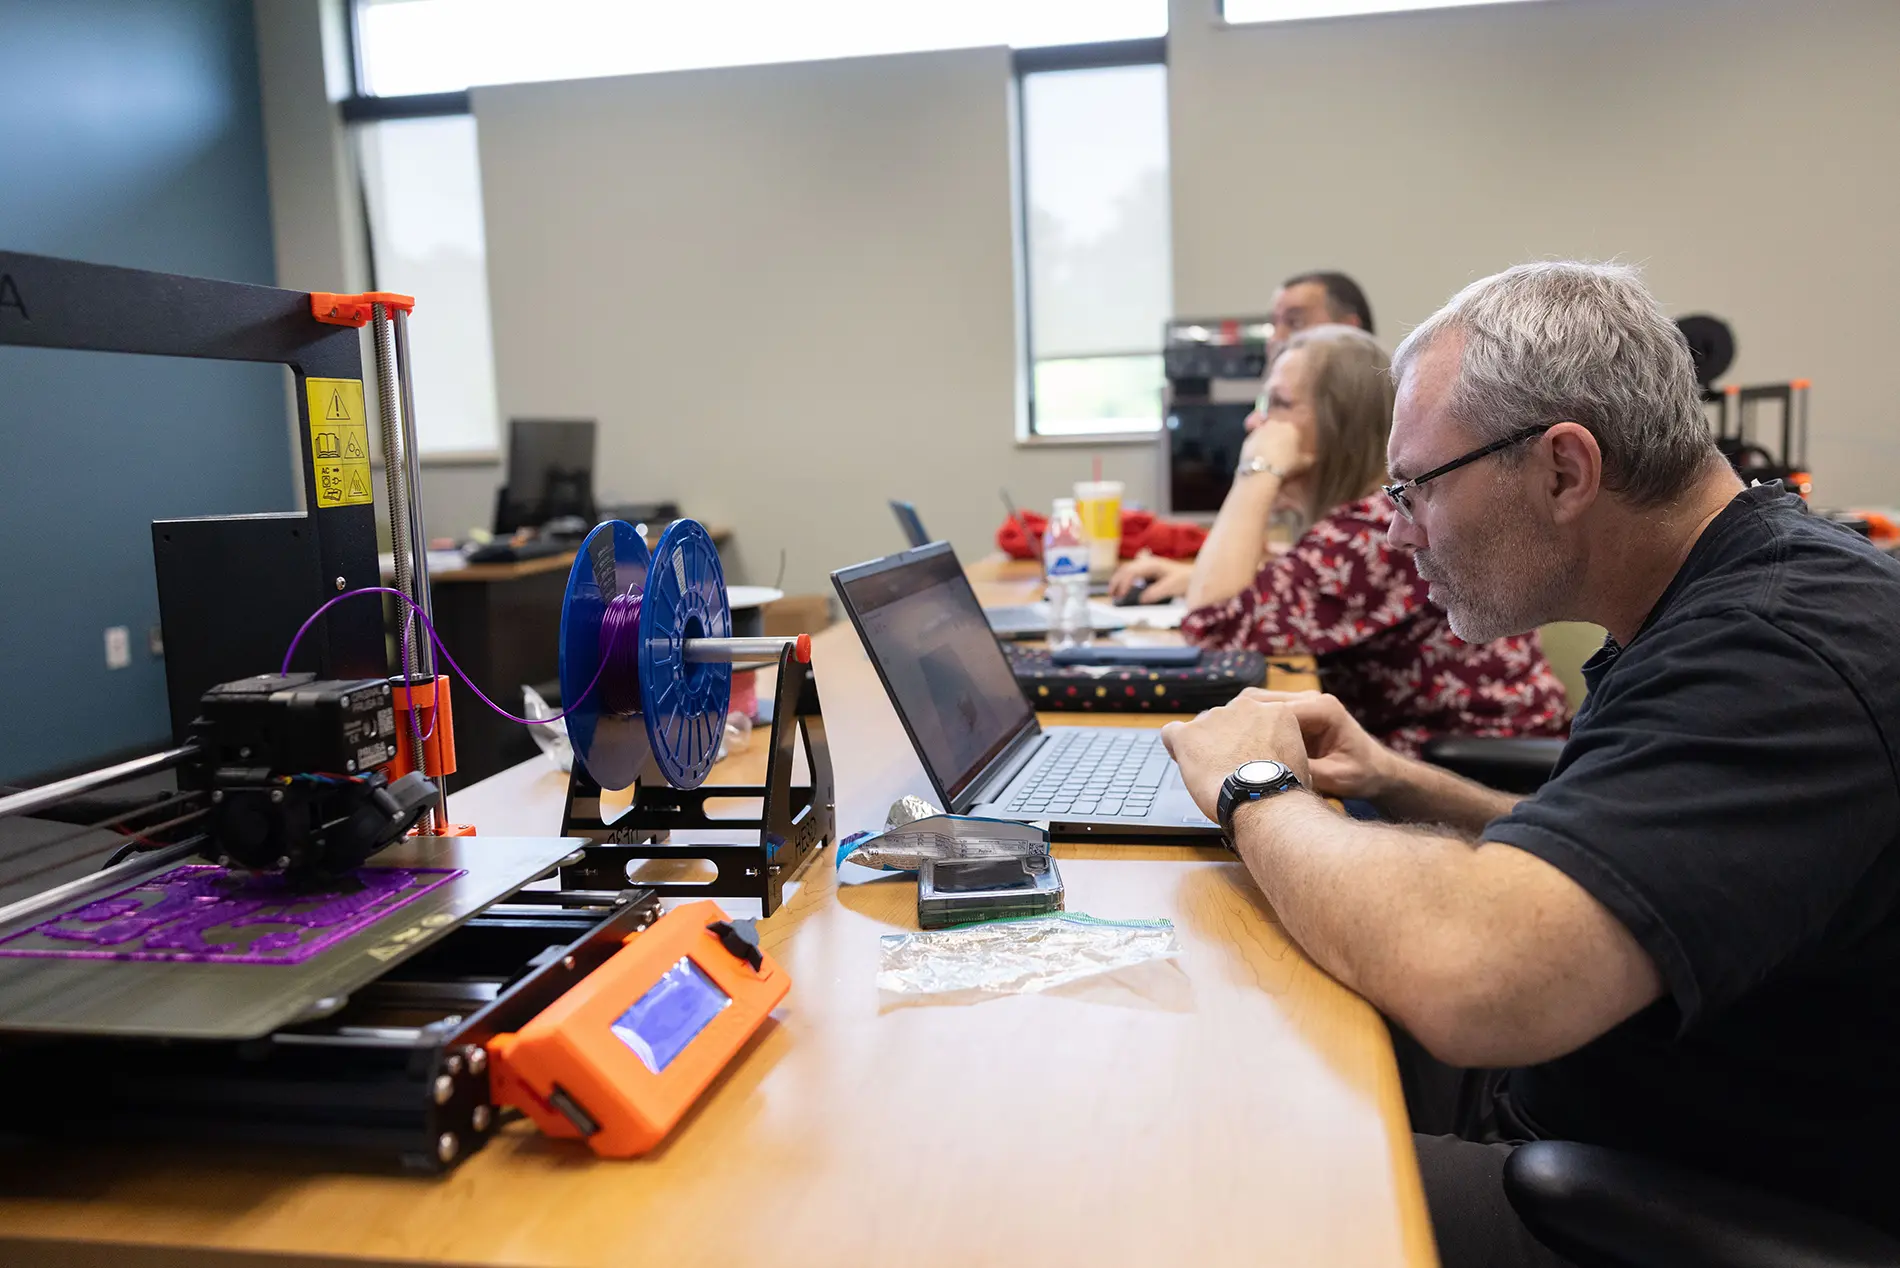 Creating something tangible: 3D Printing & Design workshop helps teachers bring new skills to the classroom